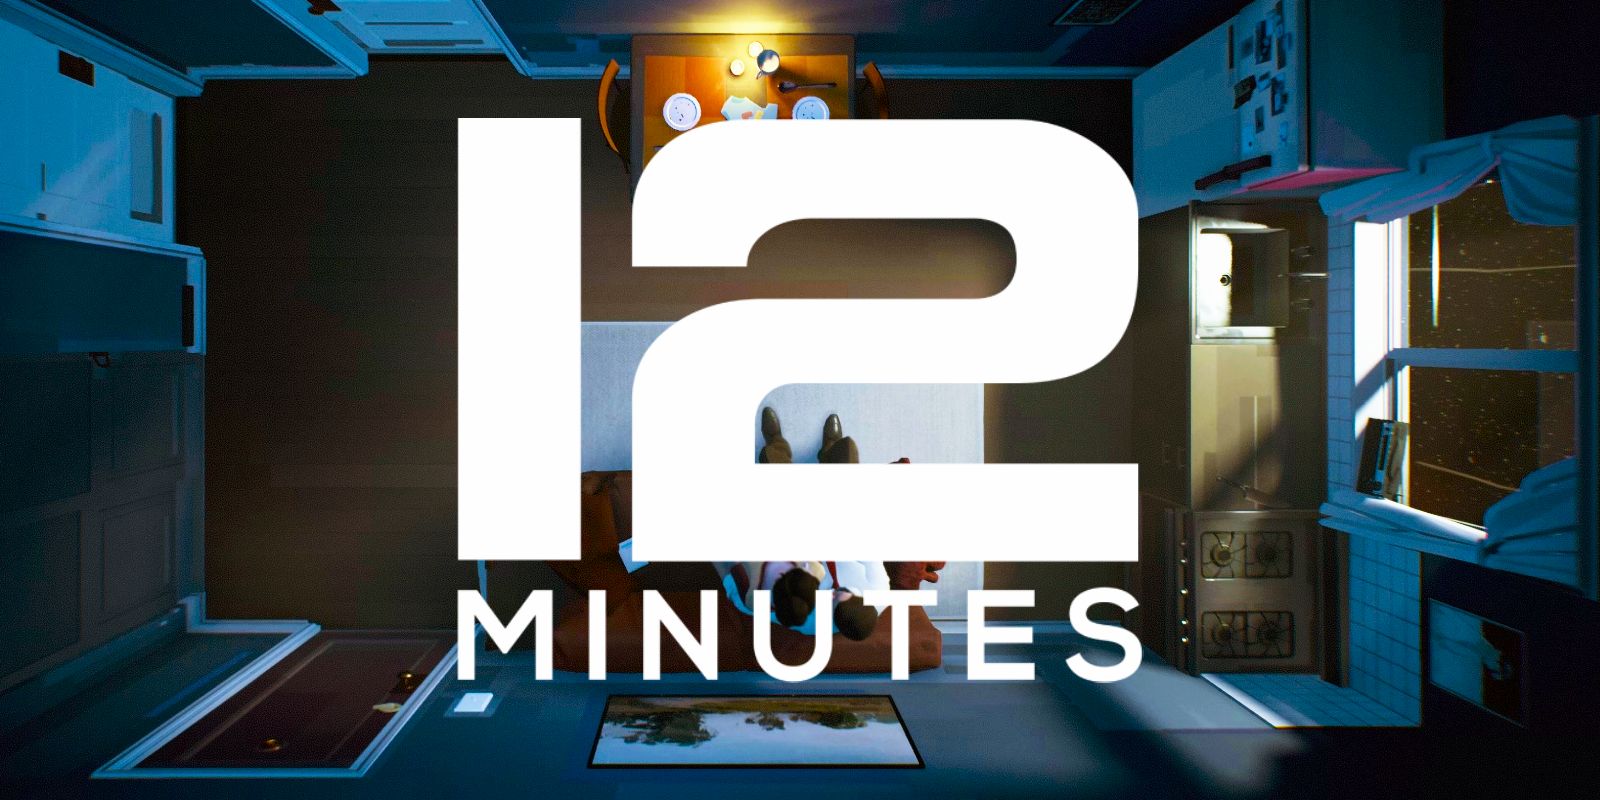 Why Twelve Minutes Reviews Are So Conflicting